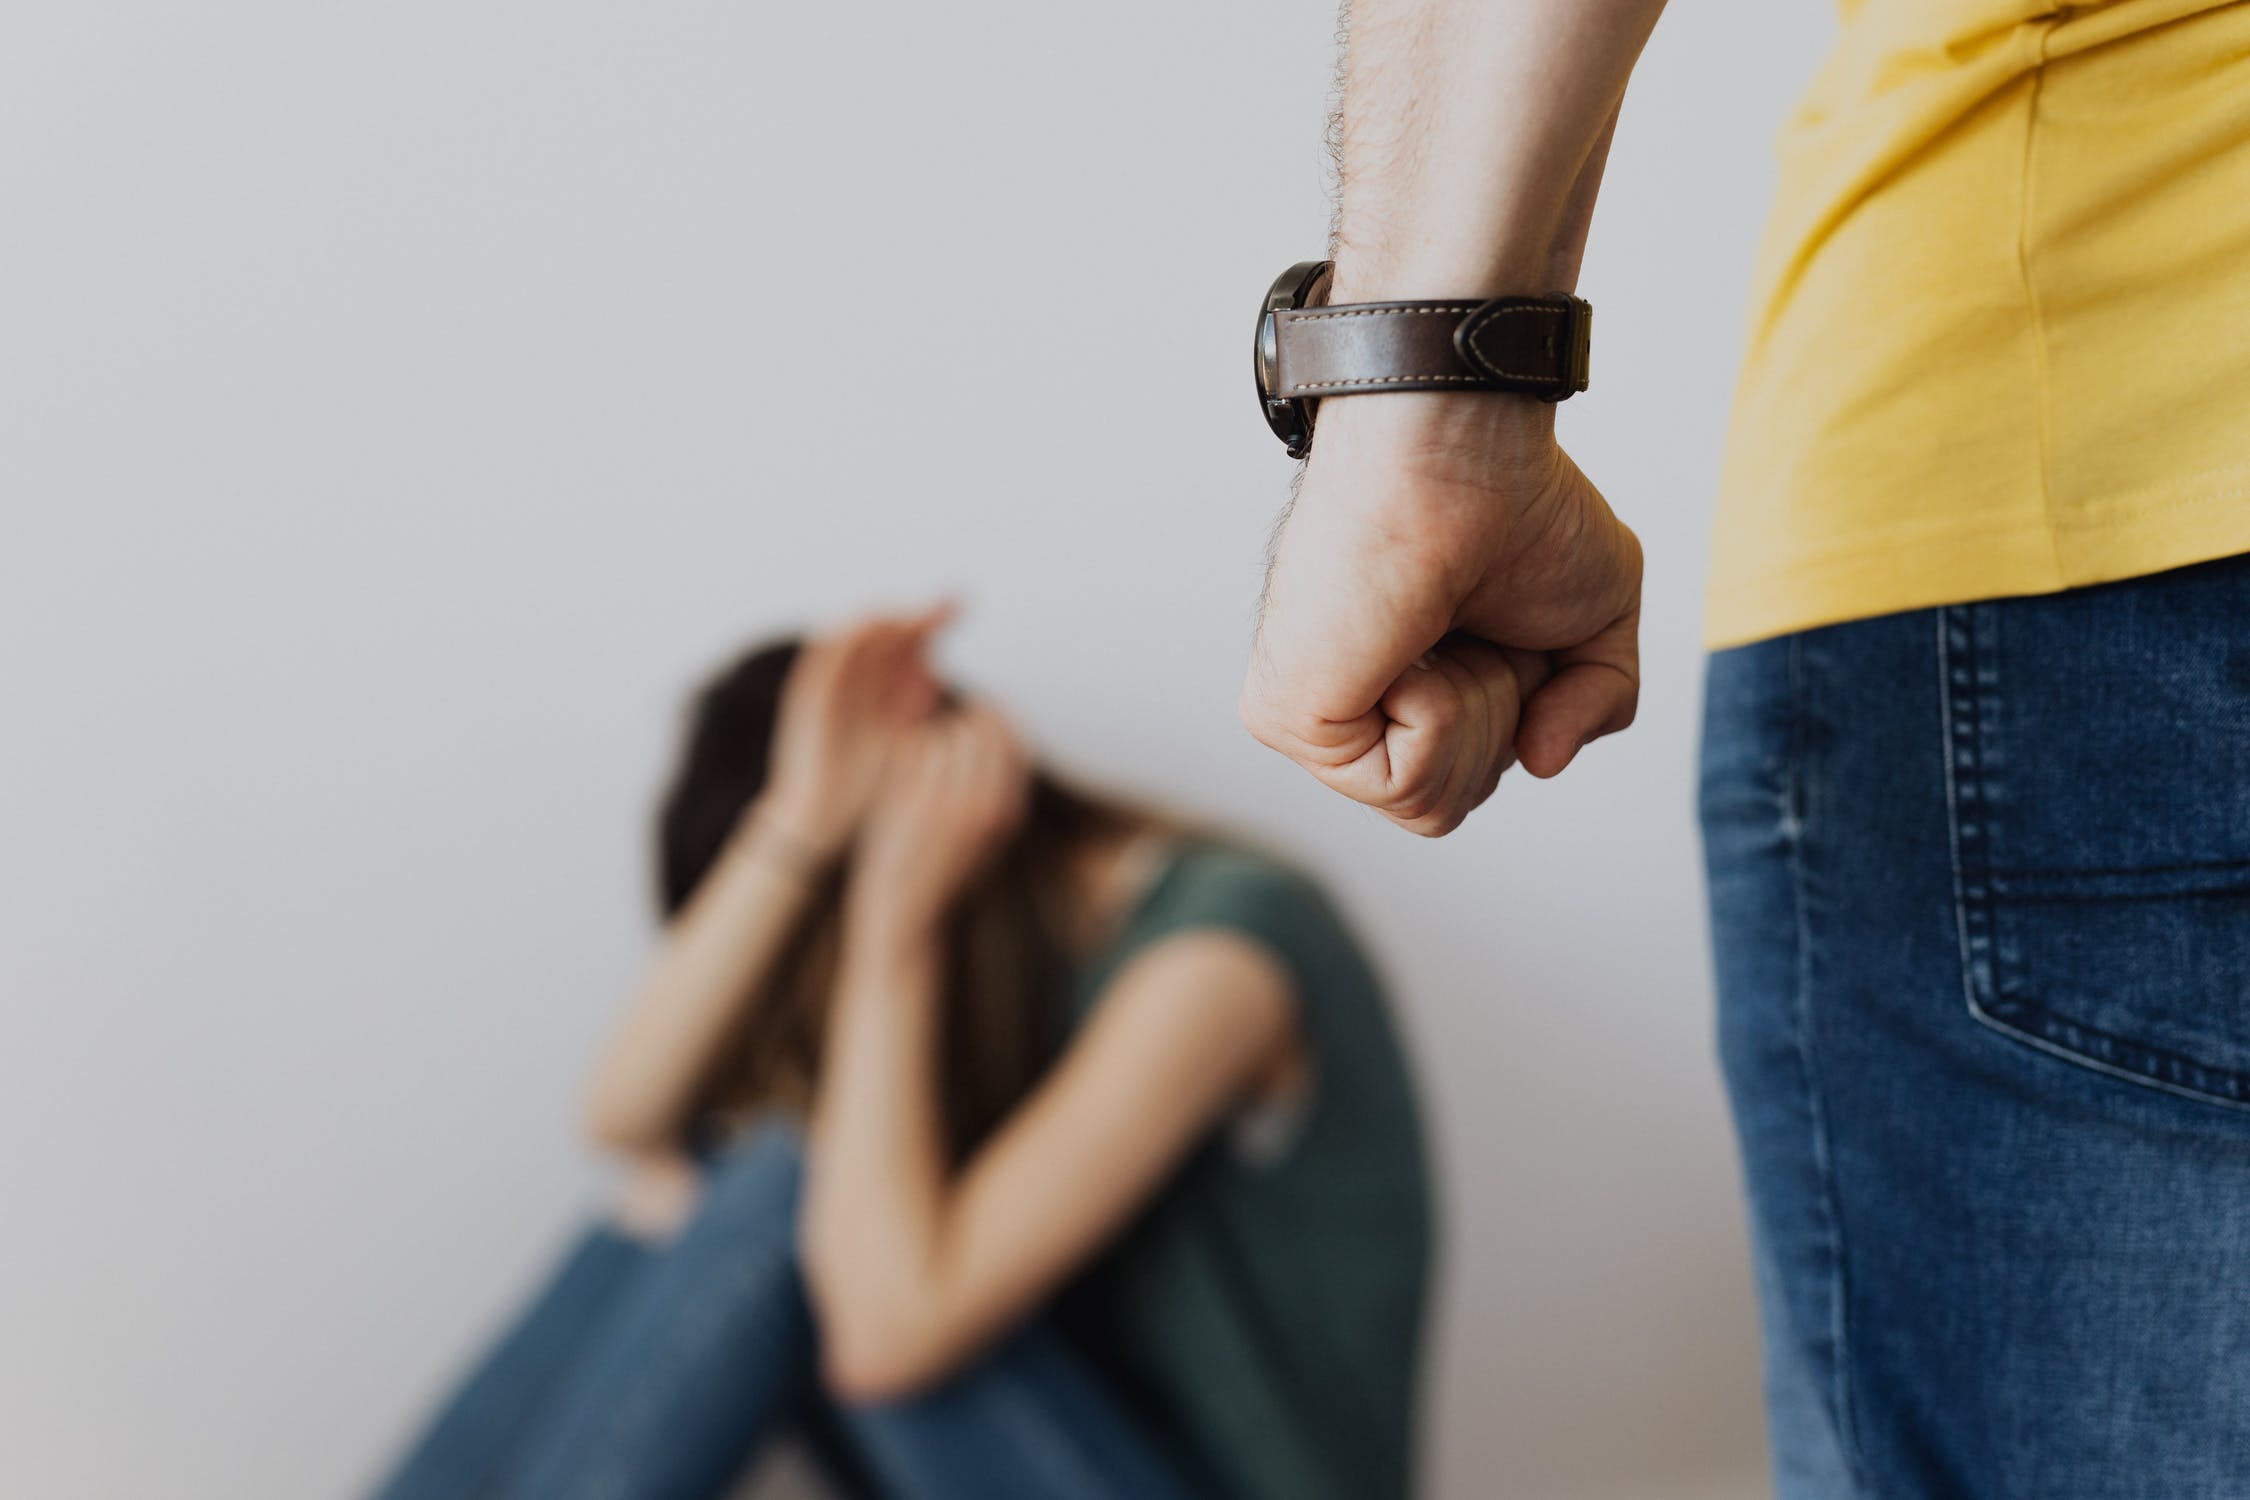 Steps to Take in a Domestic Violence Case